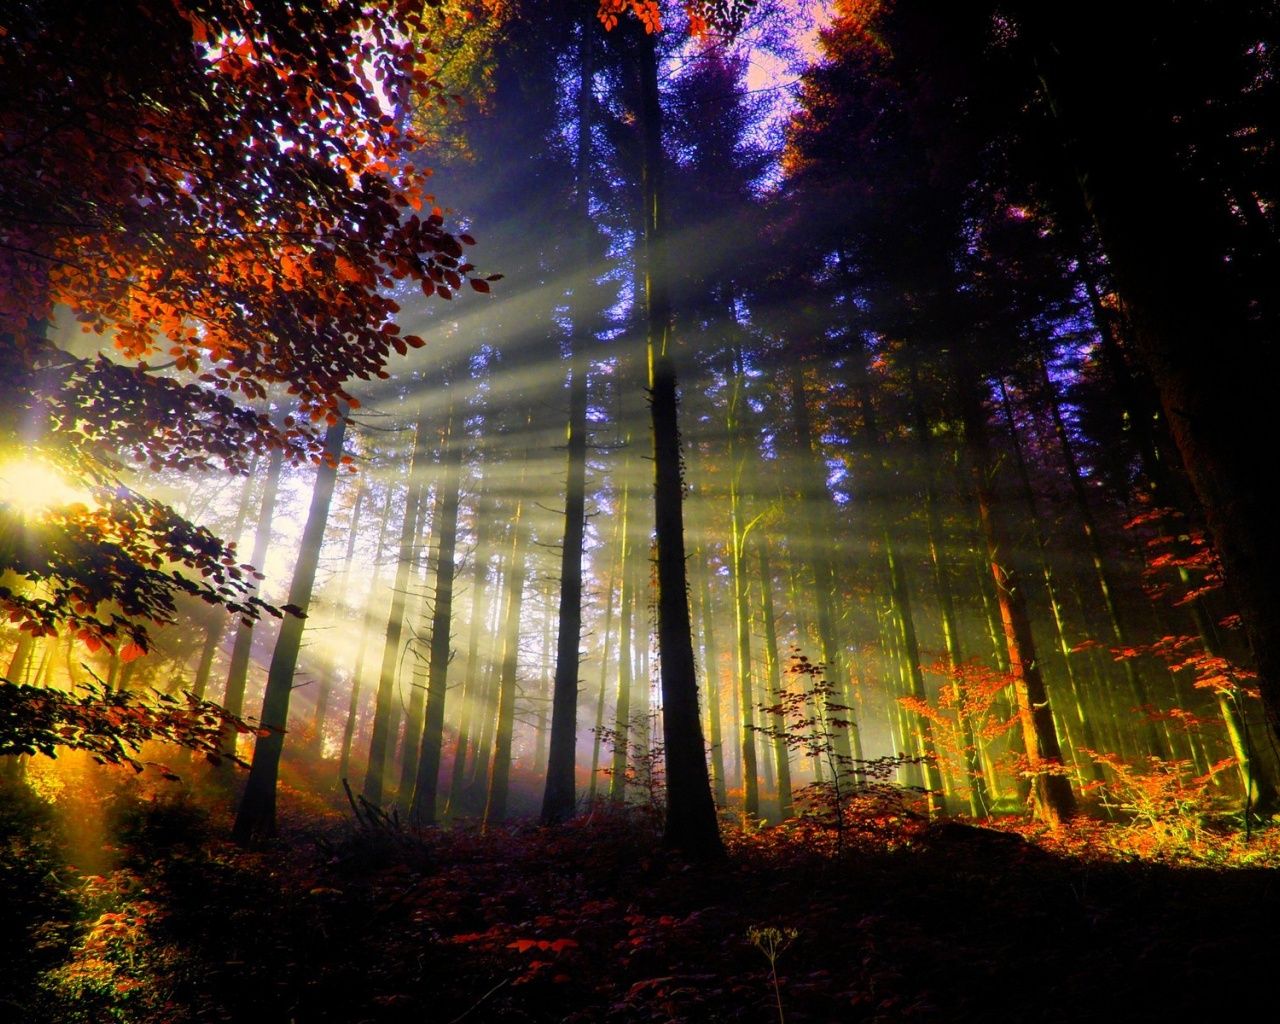 A sun shining through the trees in an autumn forest - Forest